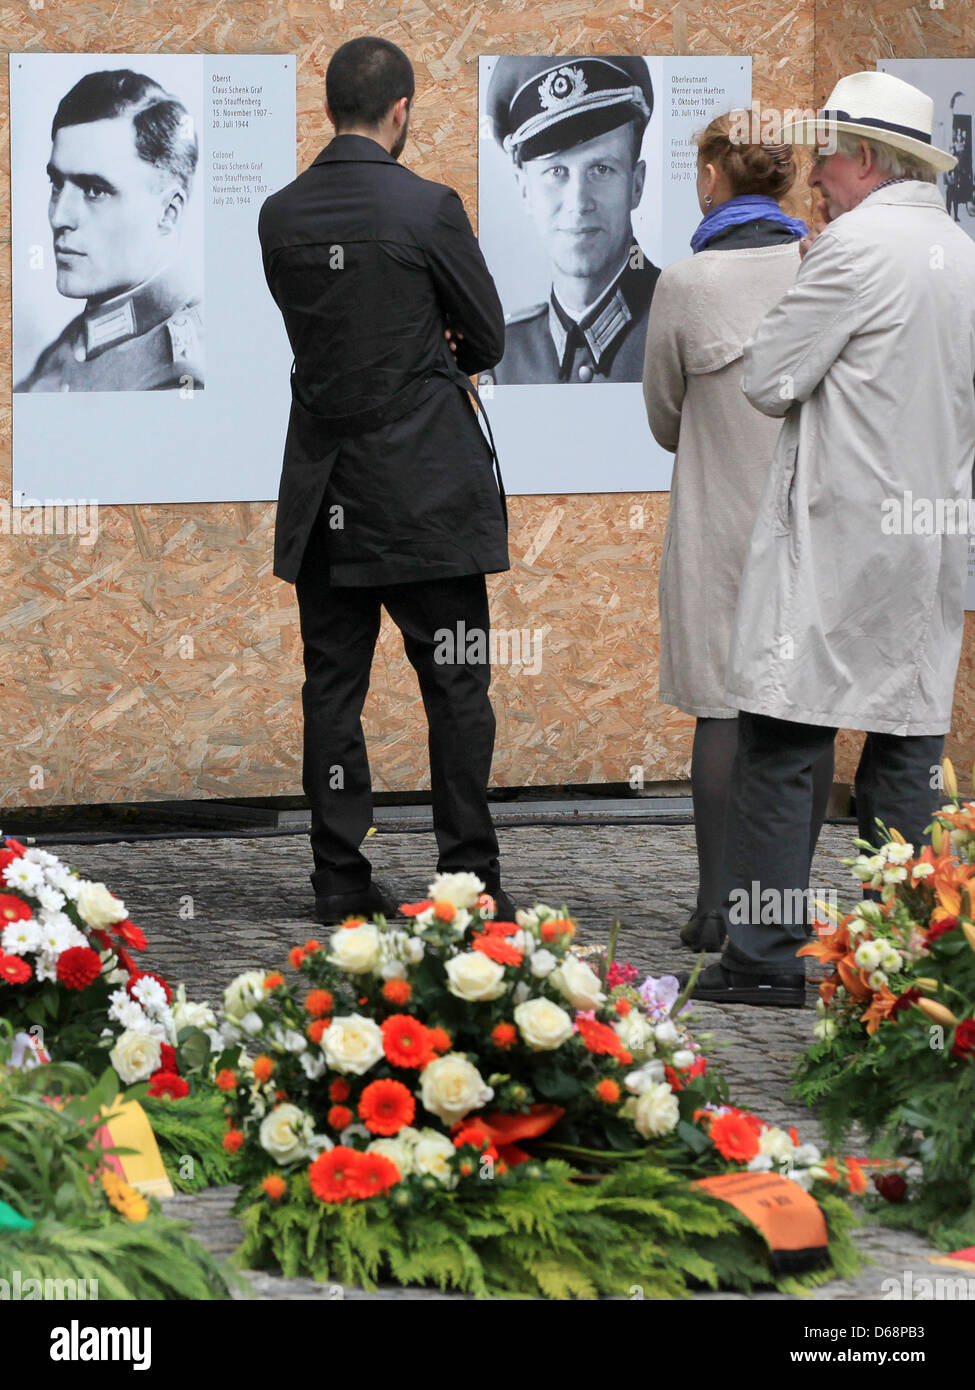 Invited guests look at portraits of resistance fighters Claus Schenk Graf von Stauffenberg (L) and Oberleutnant Werner von Haeften during a commemorative event to mark the 68th anniversary of the 1944 assassination attempt on Adolf Hitler, at the Bendlerblock in Berlin, Germany, 20 July 2012. The Bendlerblock served as the headquarters of the Wehrmacht officers who carried out the  Stock Photo